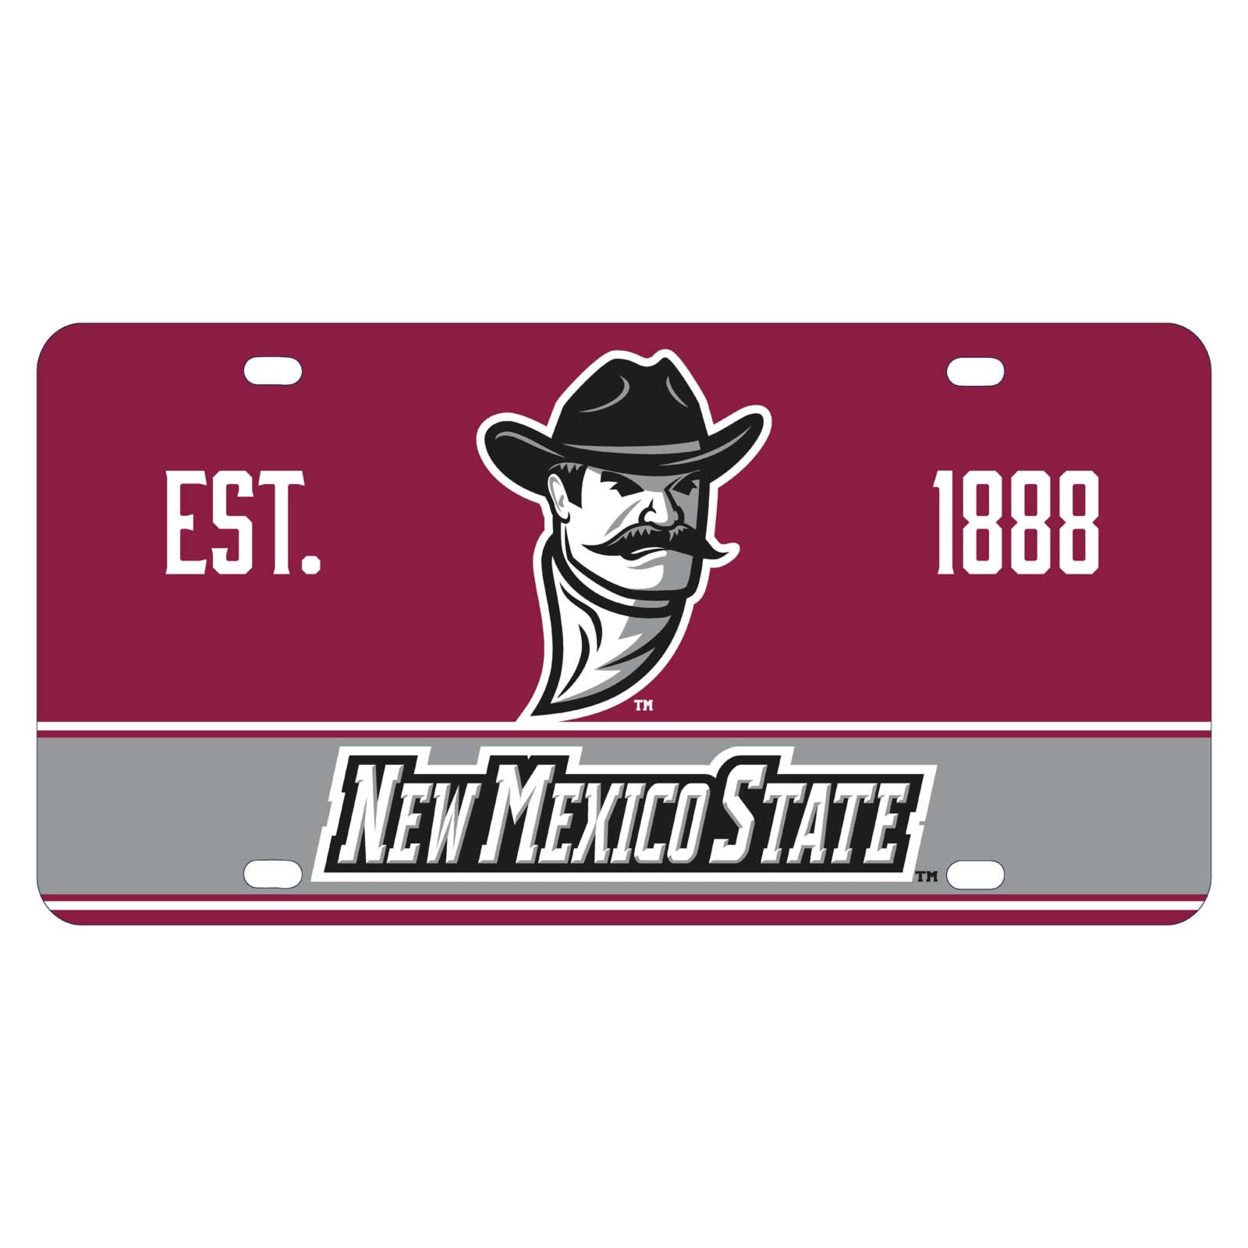 New Mexico State University Pistol Pete Metal License Plate